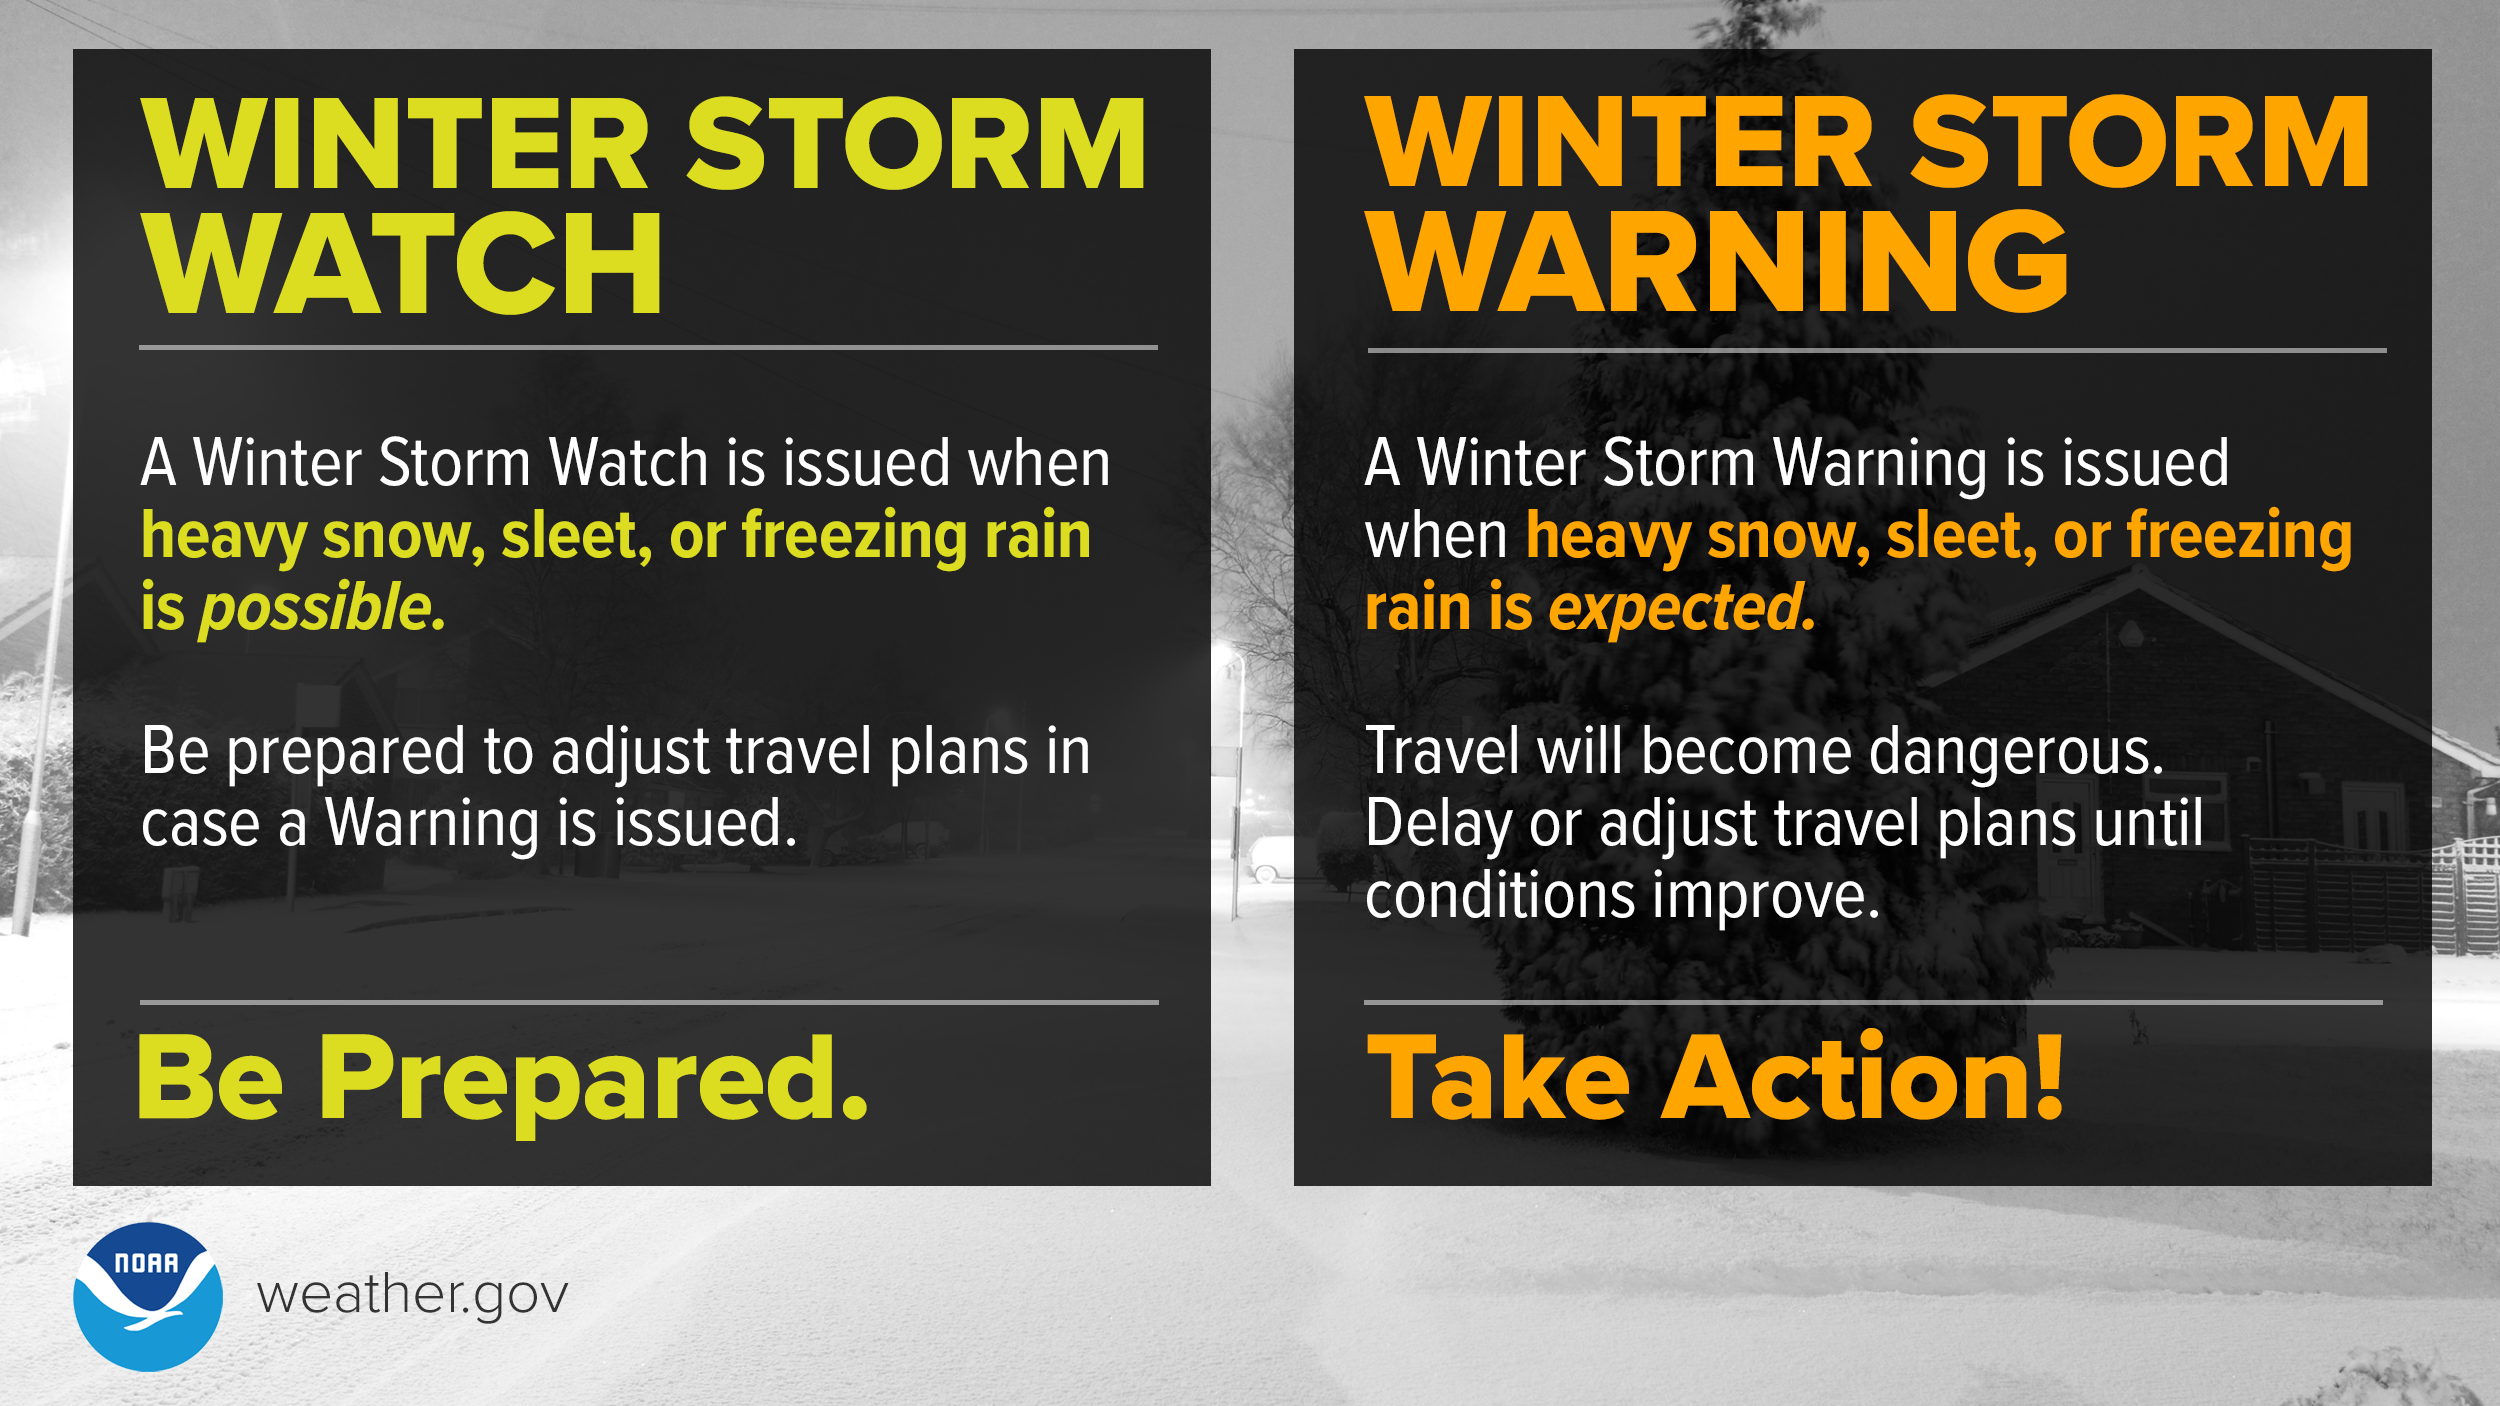 Winter Storm Watch means be prepared. A Winter Storm Watch is issued when heavy snow, sleet, or freezing rain is possible. Be prepared to adjust travel plans in case a Warning is issued. Winter Storm Warning means take action! A Winter Storm Warning is issued when heavy snow, sleet, or freezing rain is expected. Travel will become dangerous. Delay or adjust travel plans until conditions improve.